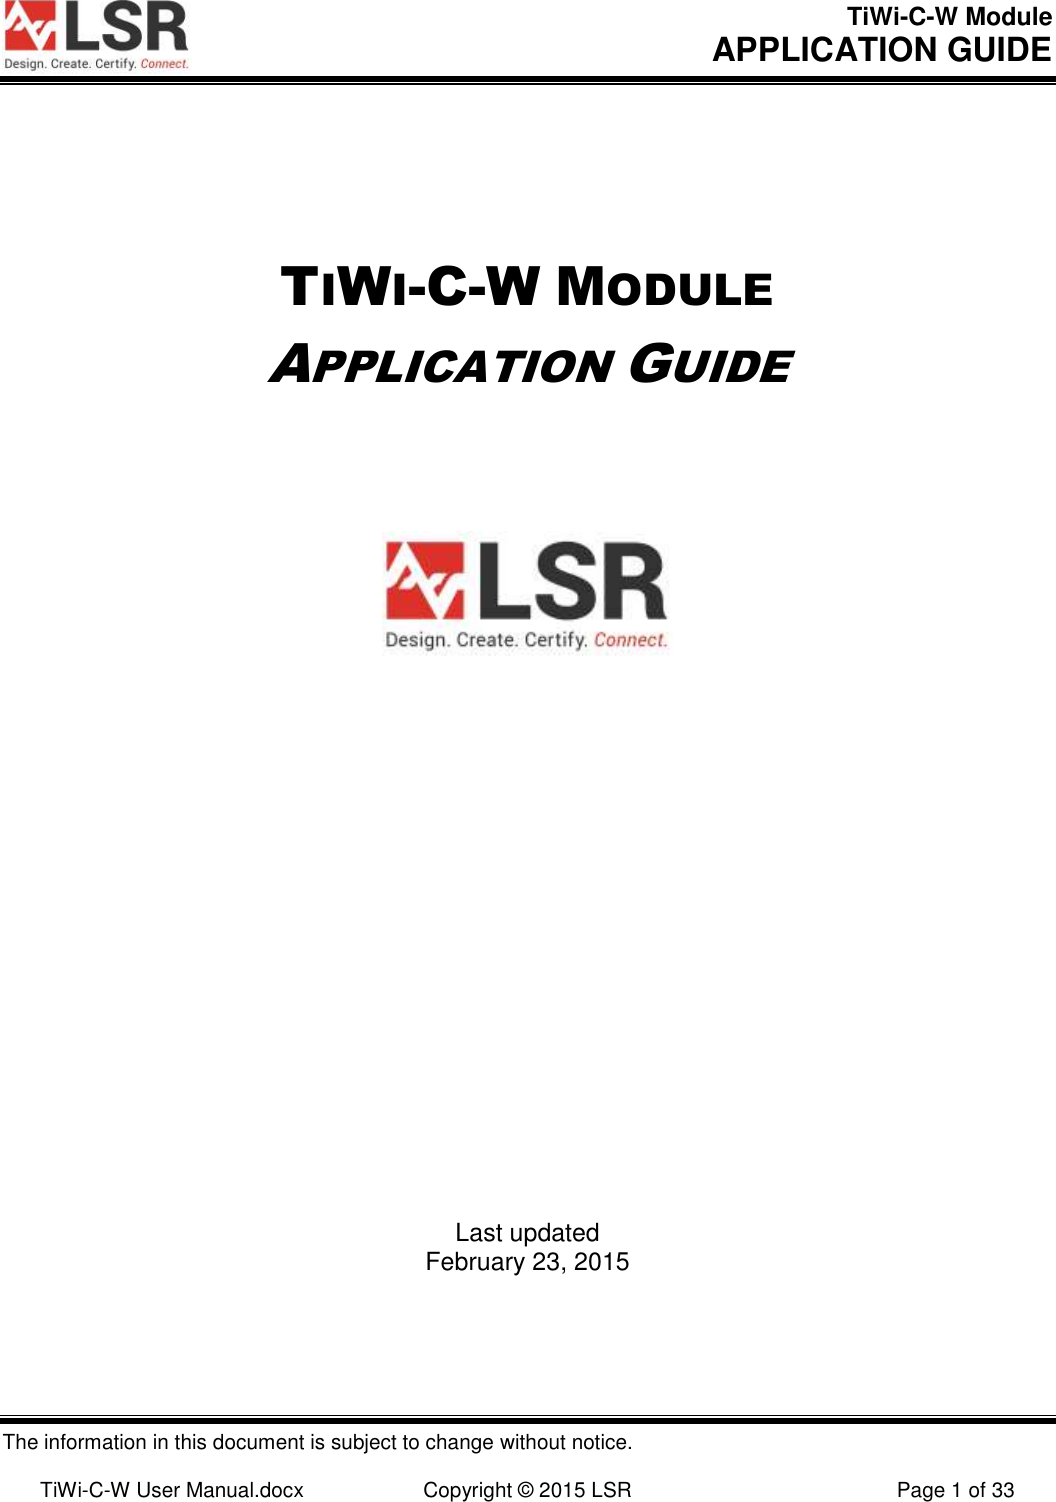 TiWi-C-W Module       APPLICATION GUIDE  The information in this document is subject to change without notice.  TiWi-C-W User Manual.docx  Copyright © 2015 LSR  Page 1 of 33 TIWI-C-W MODULE APPLICATION GUIDE              Last updated February 23, 2015